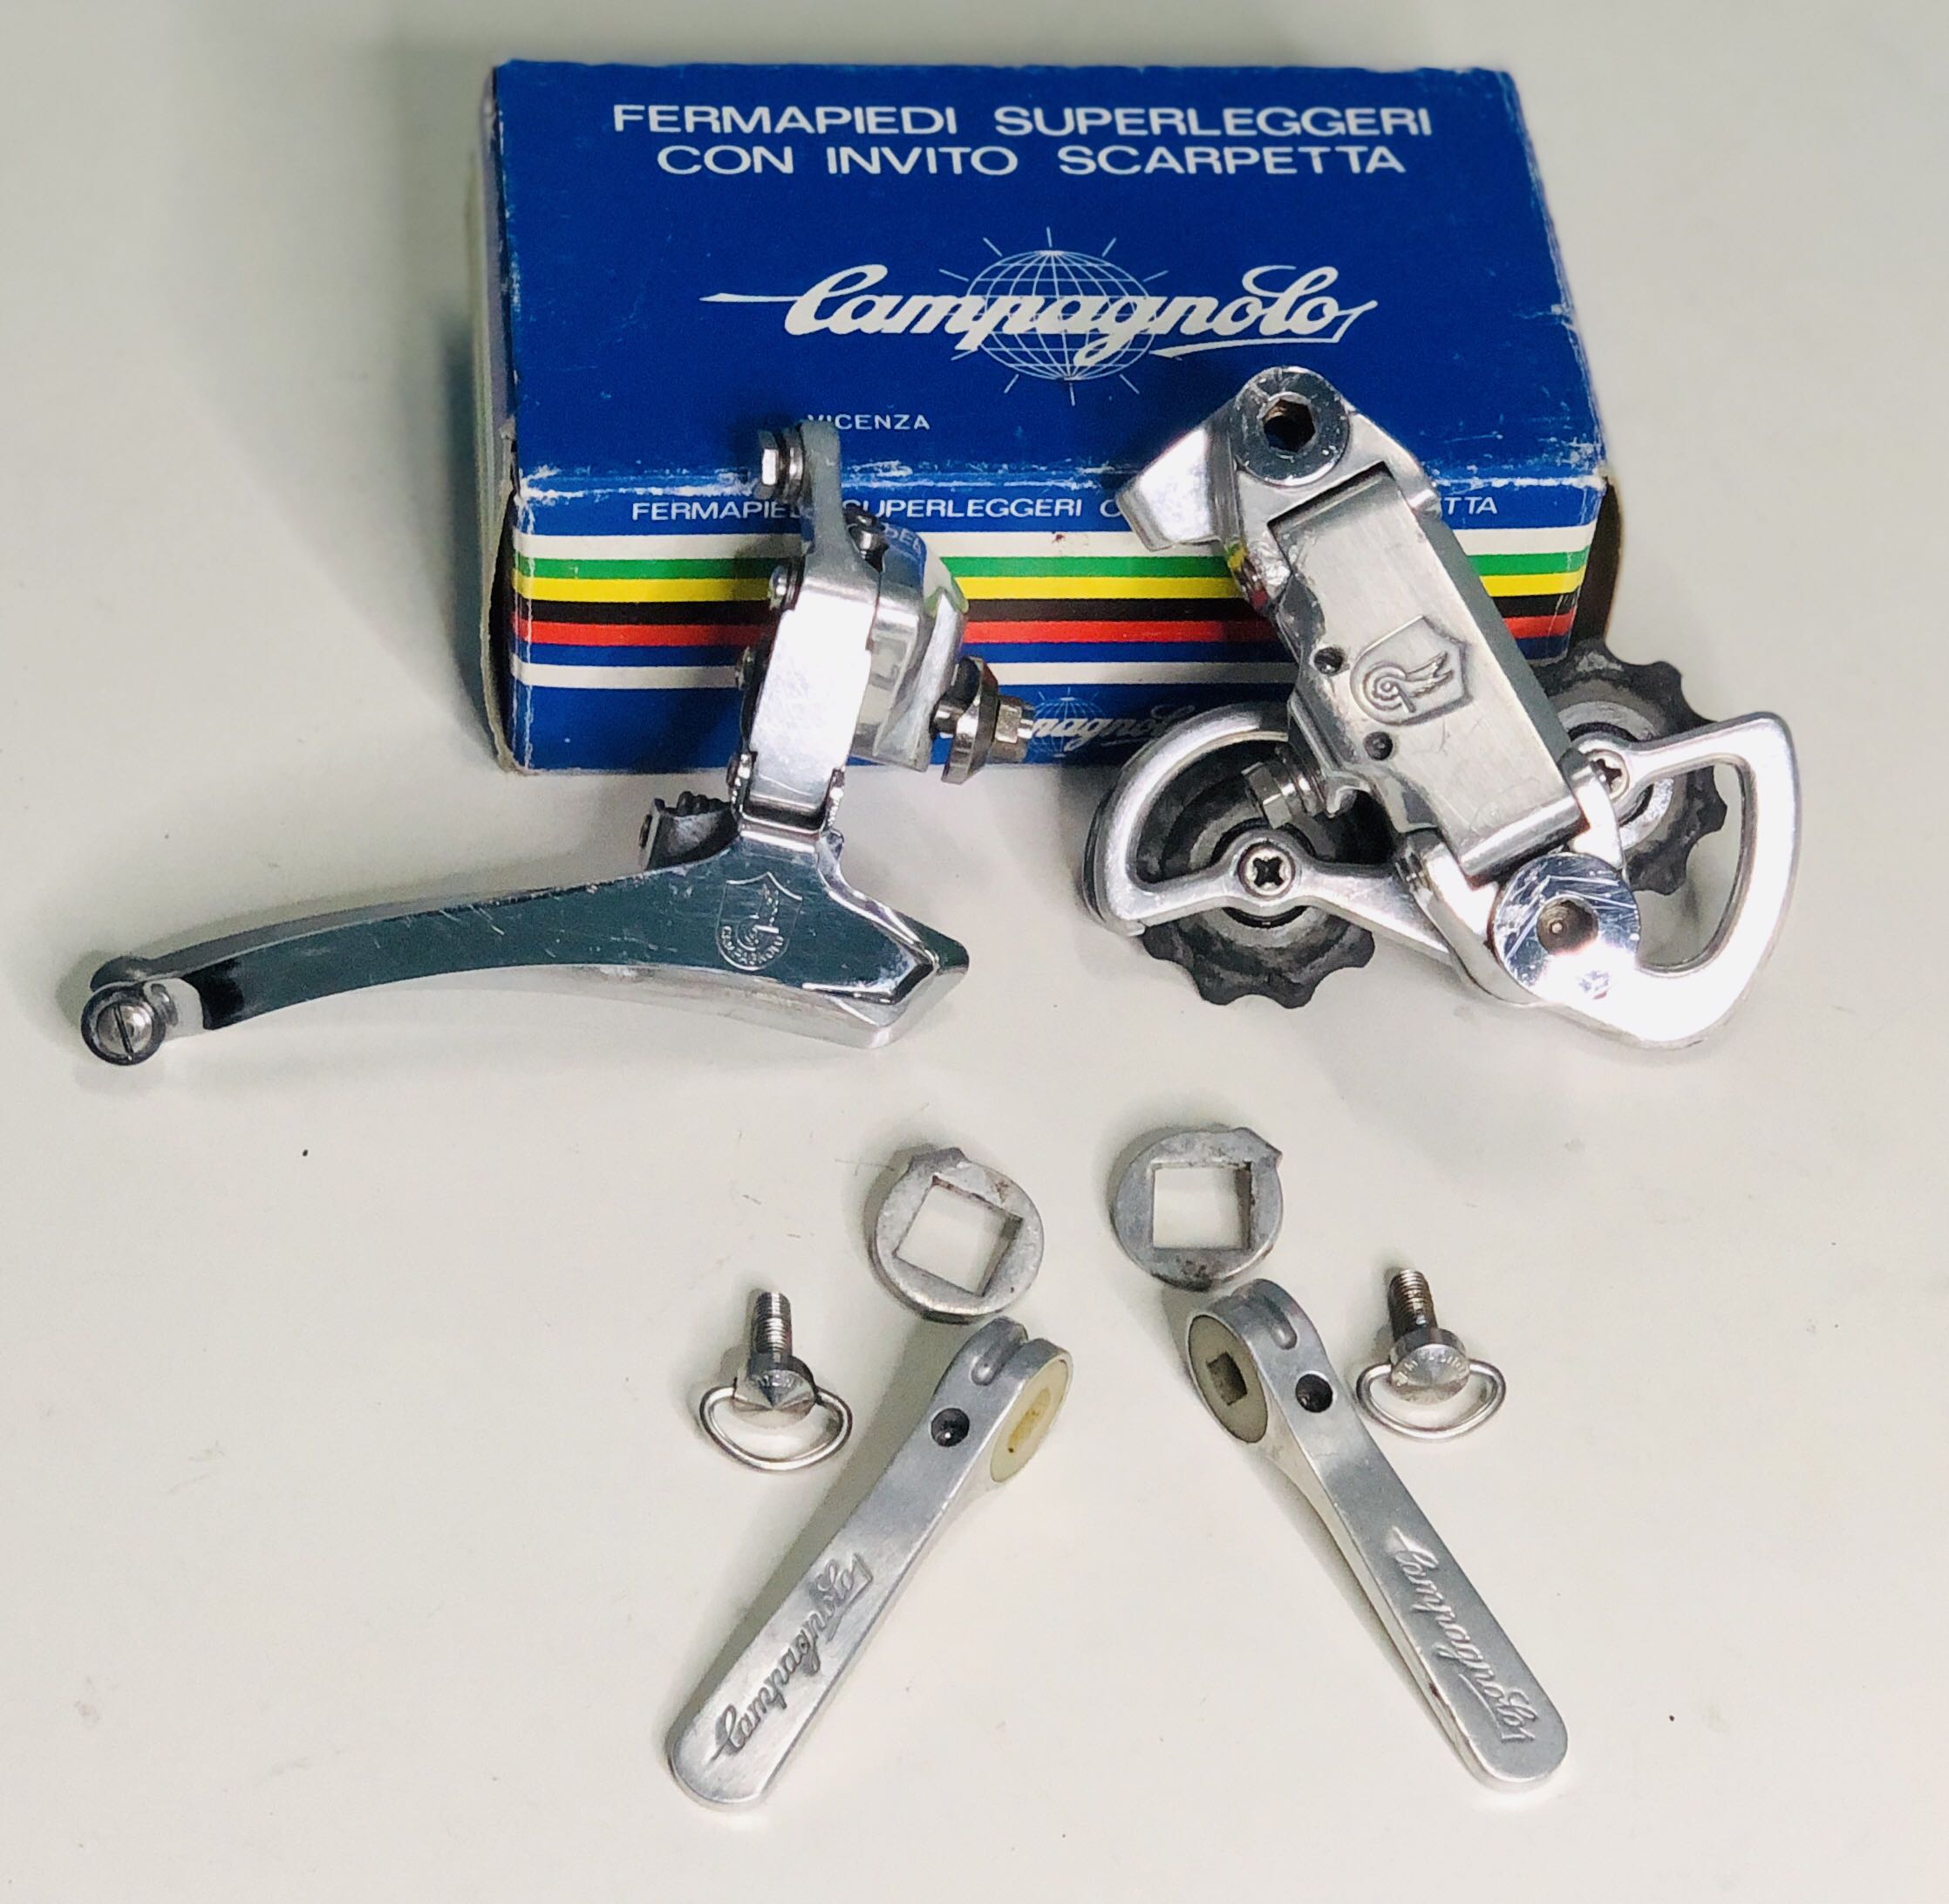 Campagnolo Victory Groupset FD RD & downtube Shifter Vintage